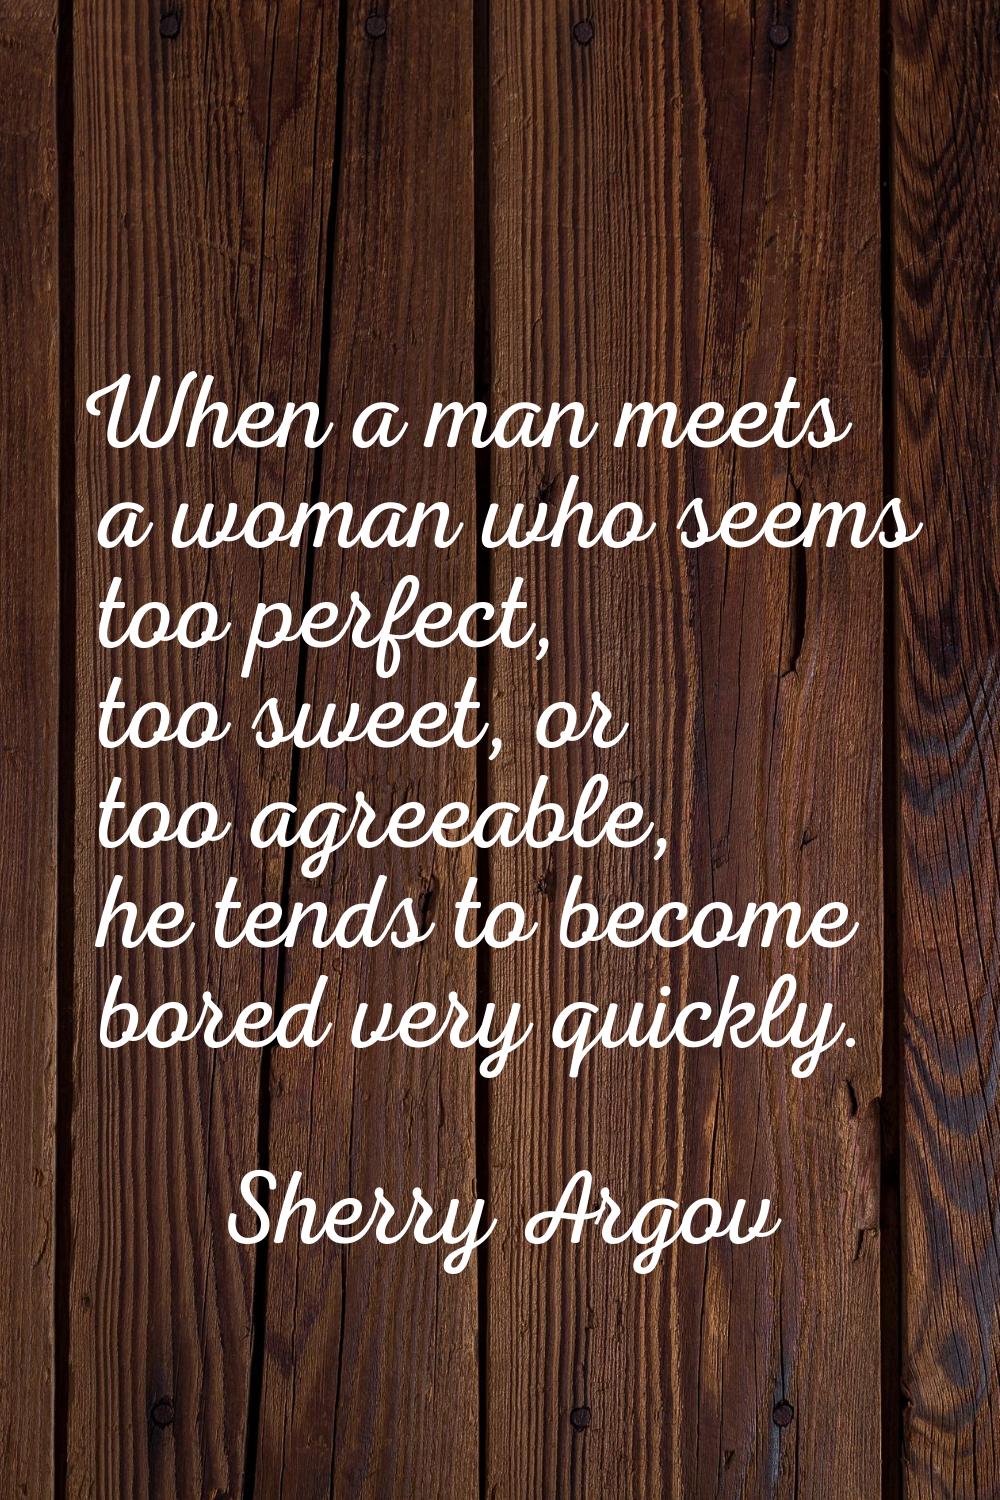 When a man meets a woman who seems too perfect, too sweet, or too agreeable, he tends to become bor